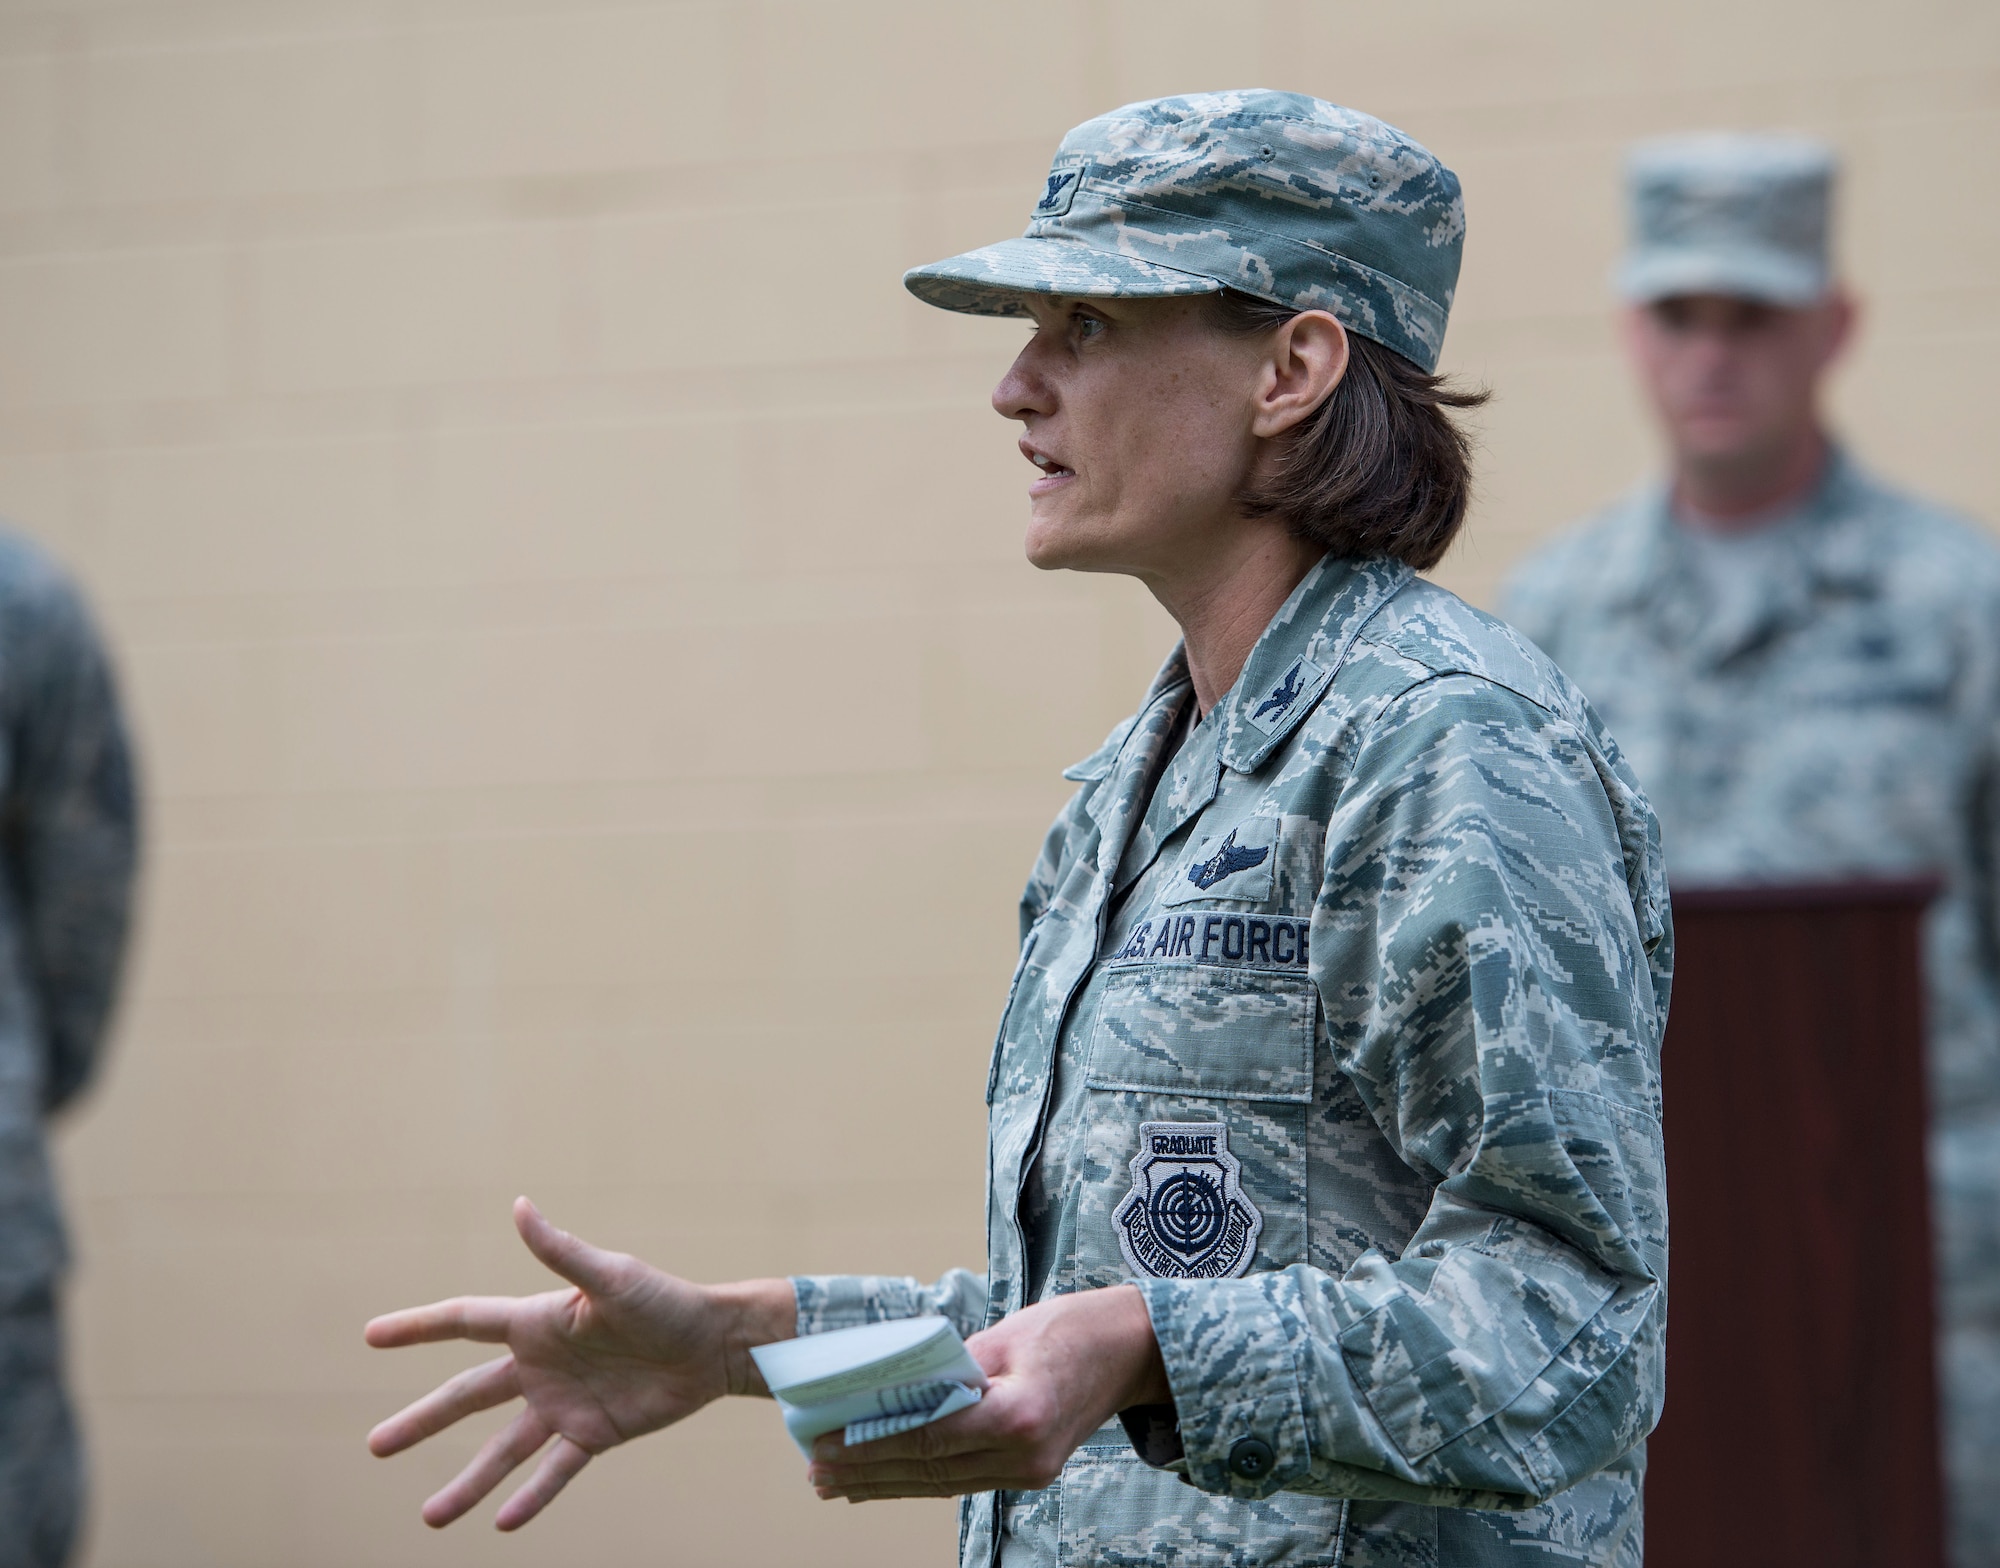 Col. Leslie Maher, 375th Air Mobility Wing commander, gives her remarks during the Rockwell Hall grand opening, June 20, 2018, at Scott Air Force Base, Illinois. The six-month renovation project involved installing new furniture and carpet, as well as repainting the walls. (U.S. Air Force photo by Airman 1st Class Tara Stetler)